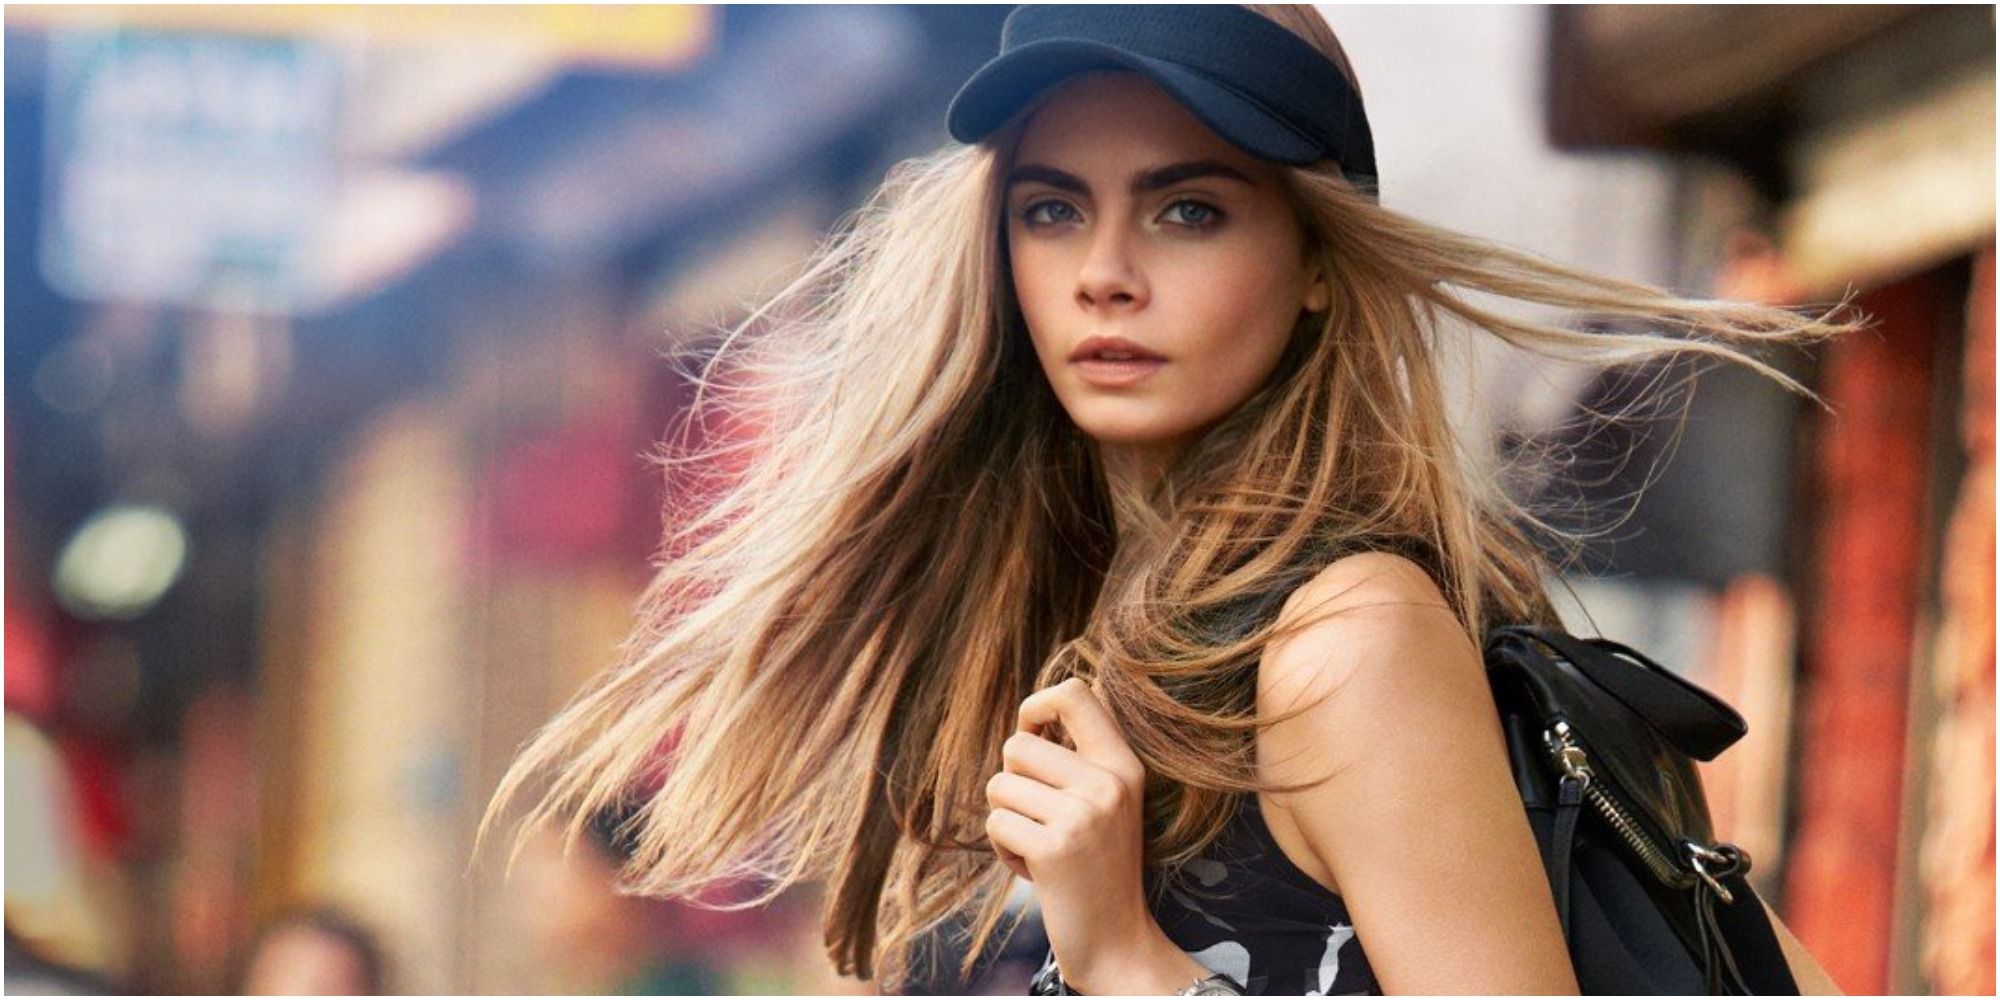 10 Best Cara Delevingne Movies Ranked (According To Rotten Tomatoes) RELATED Riverdale 10 Worst Things The Teens Have Done Ranked NEXT Rami Maleks 10 Best Movies (According To Rotten Tomatoes)